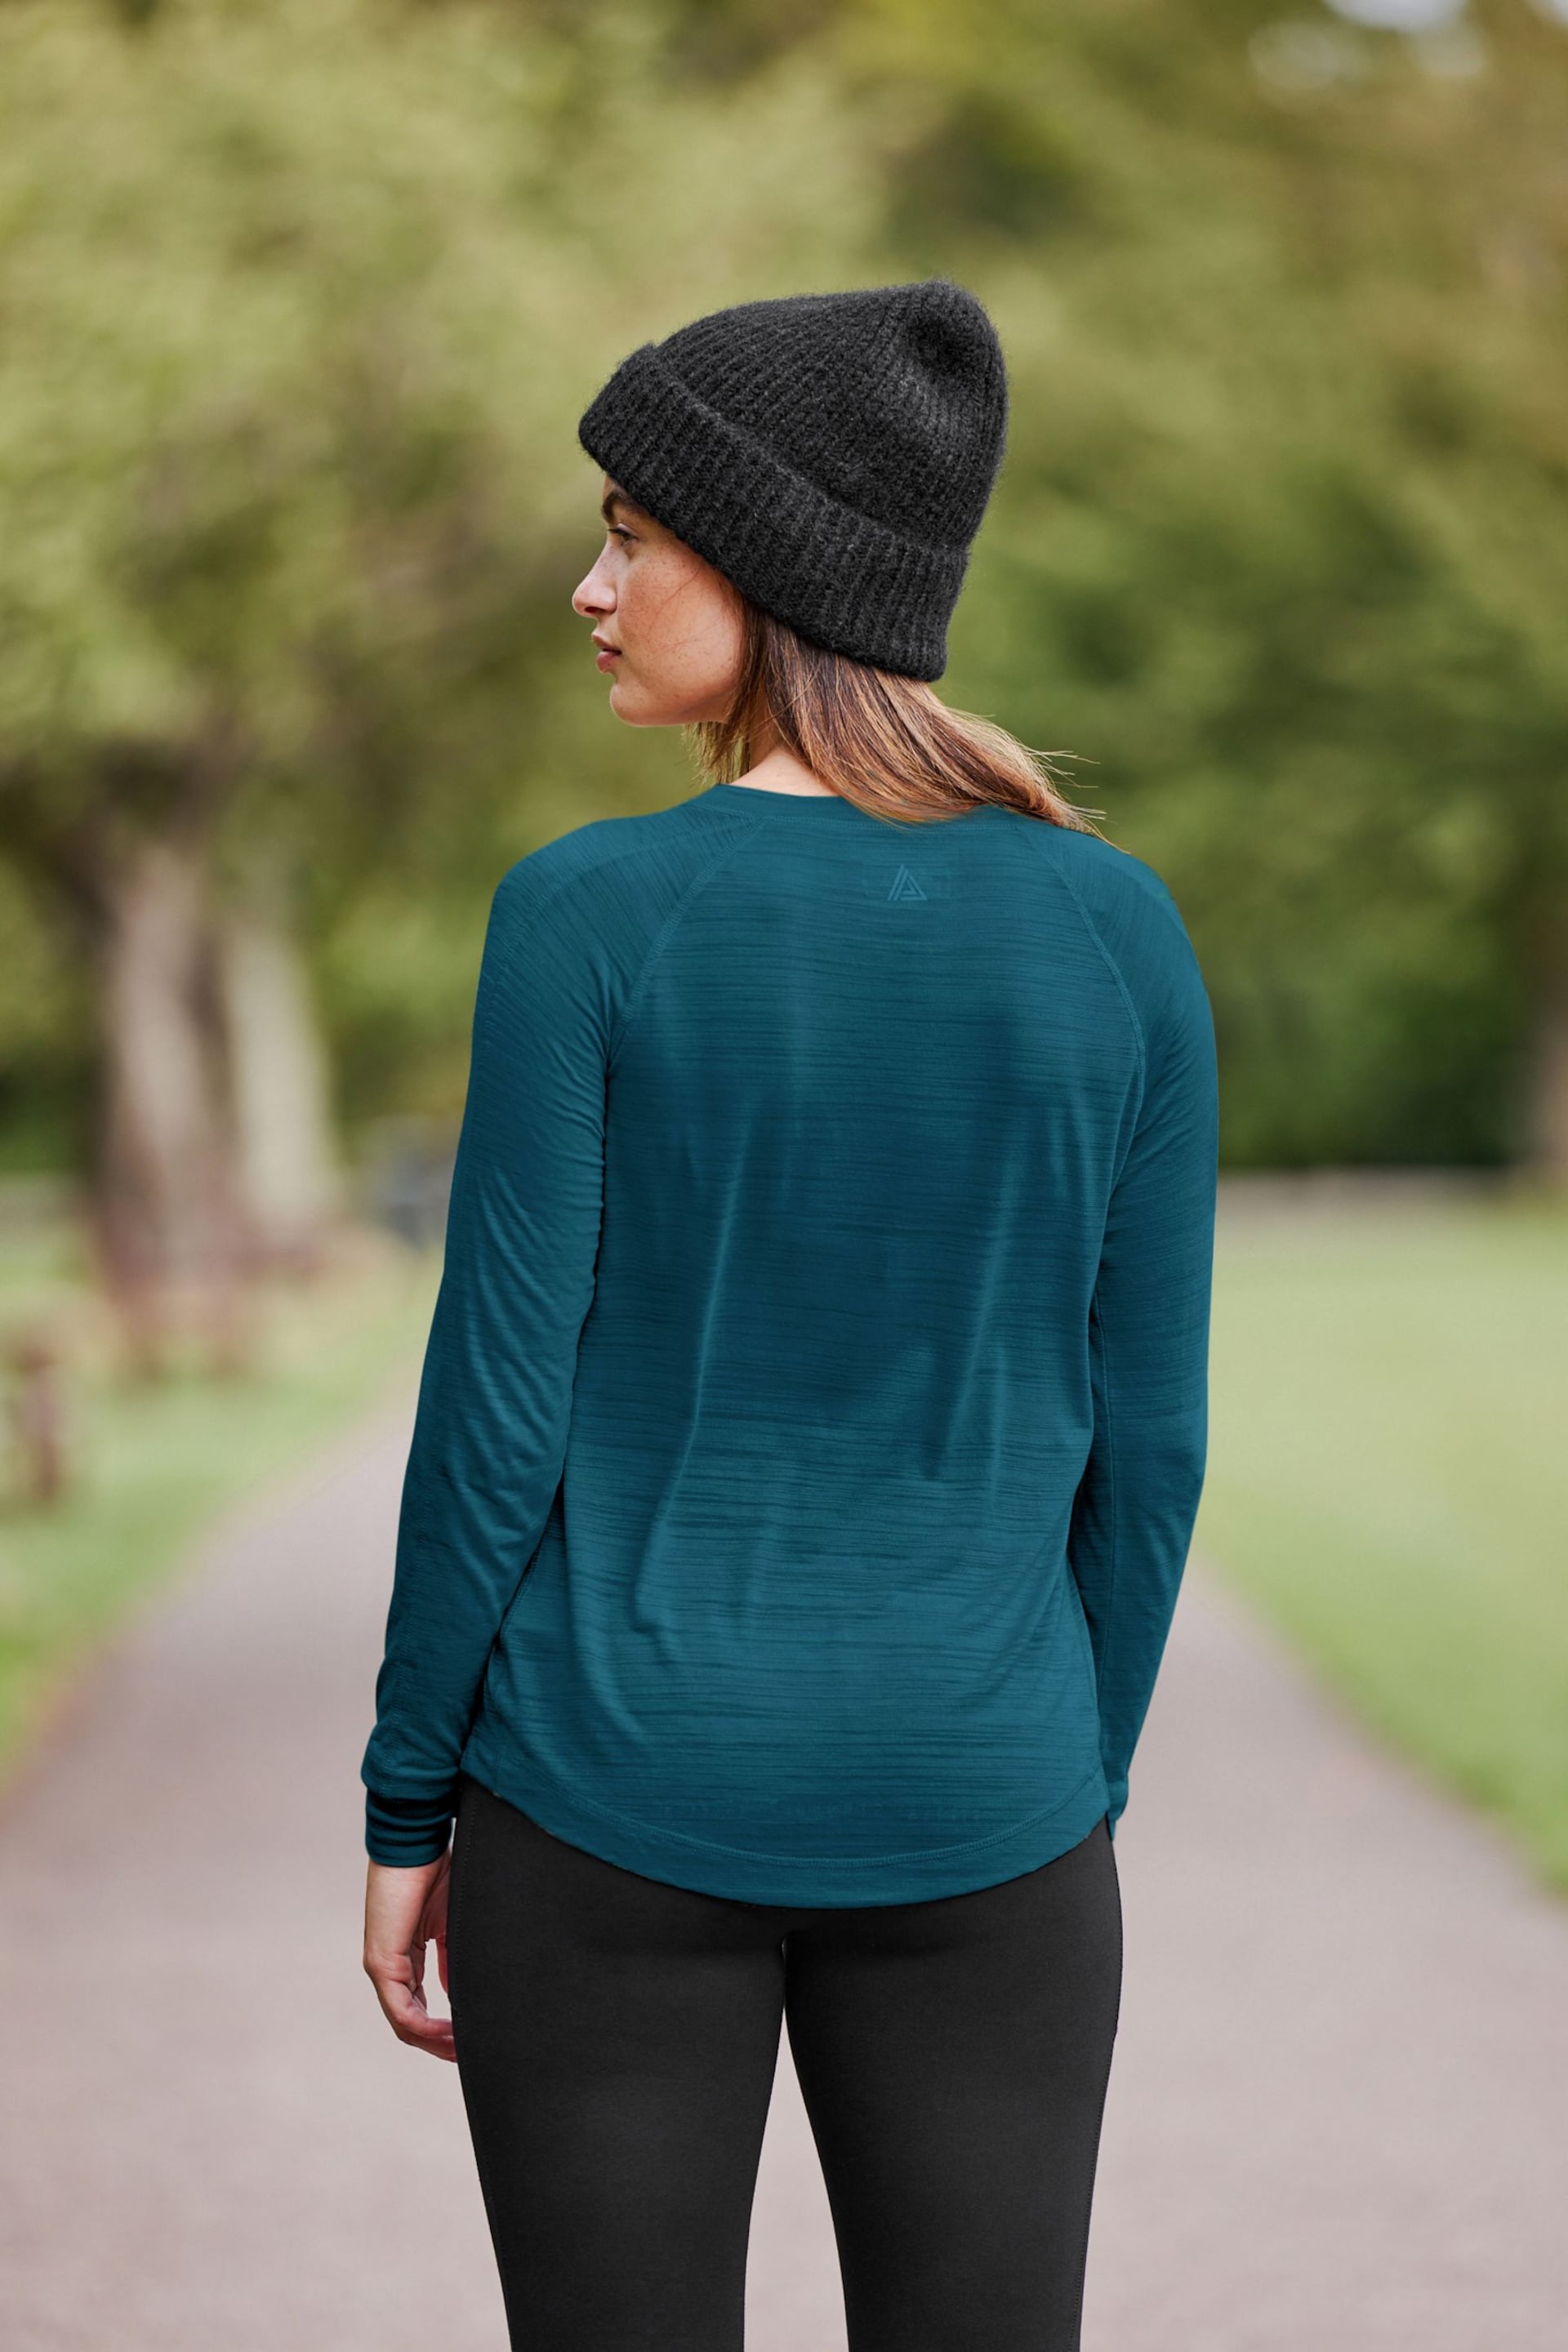 Teal Blue Active Lightweight Stitch Detail Long Sleeve Top - Image 3 of 6